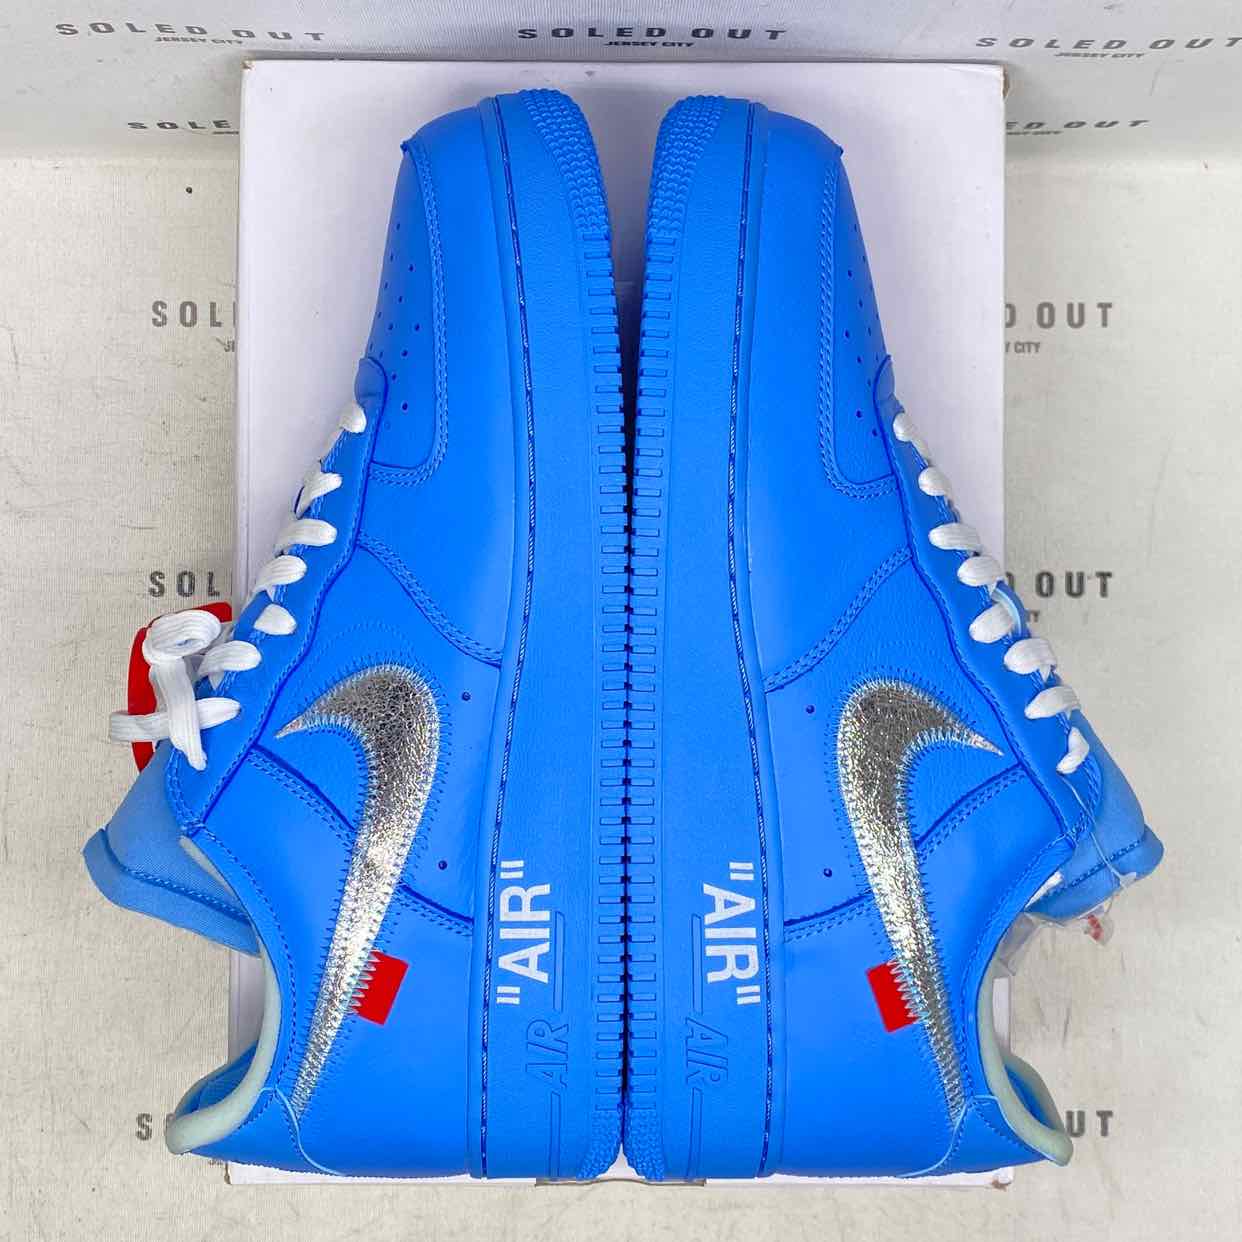 Nike Air Force 1 Low &quot;Mca&quot; 2019 New (Cond) Size 10.5